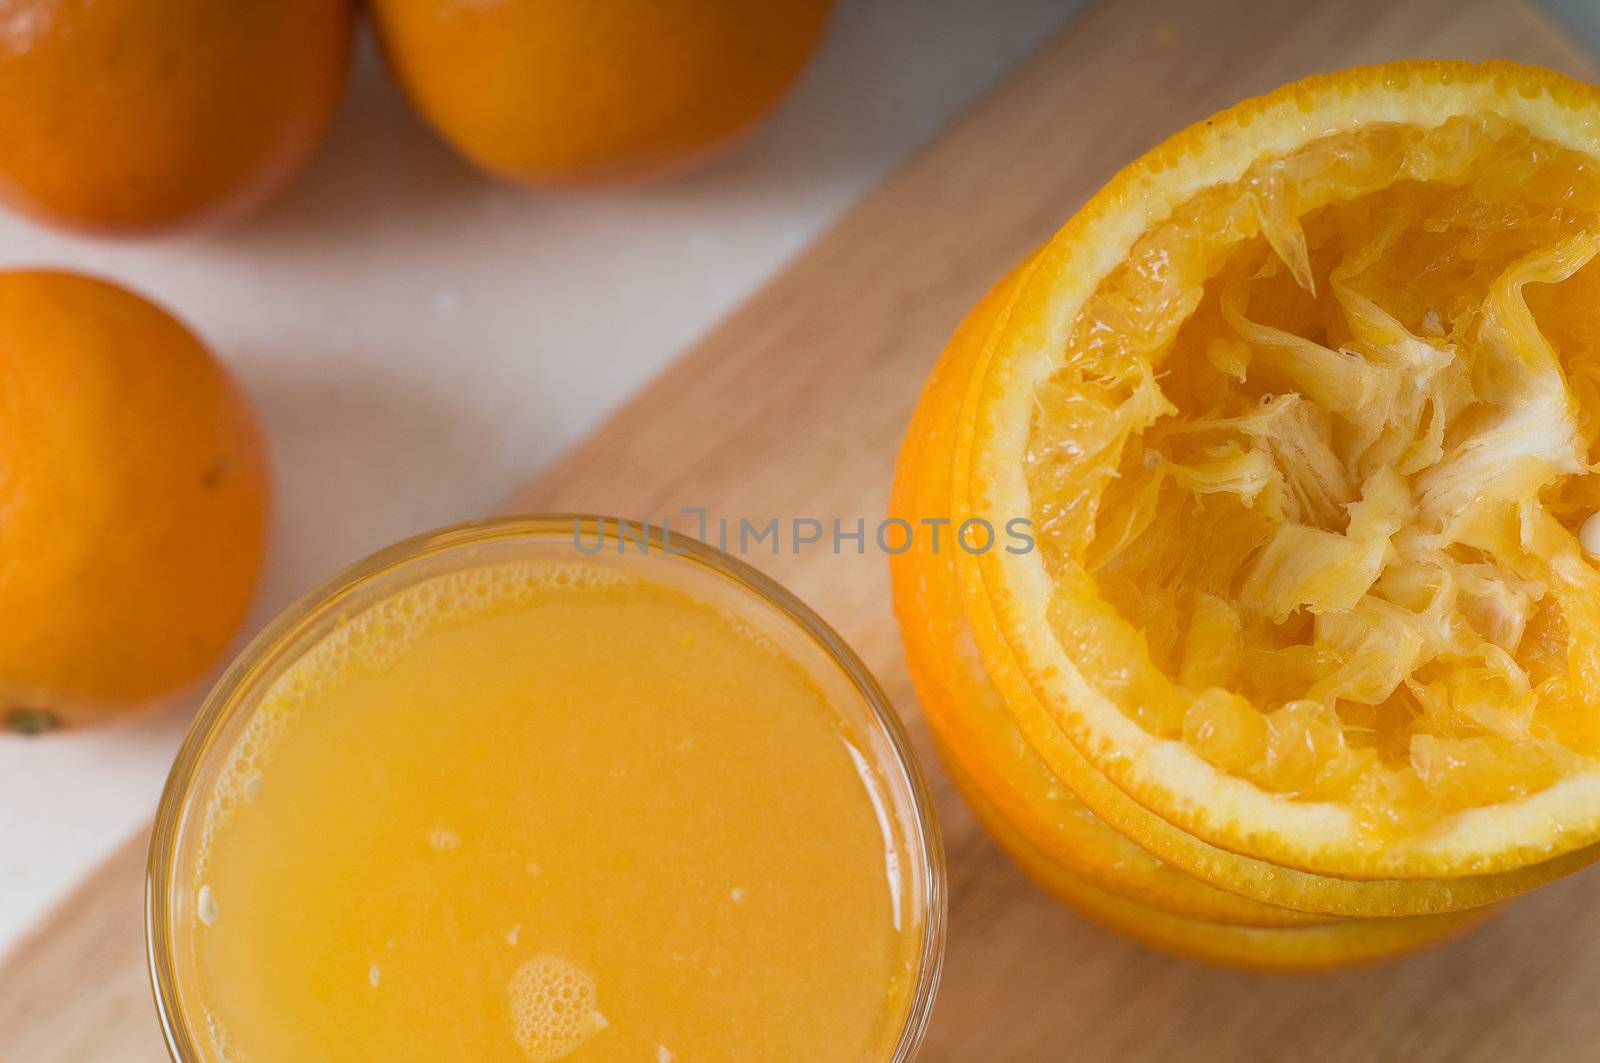 Shot of glass orang juice on the tabletop